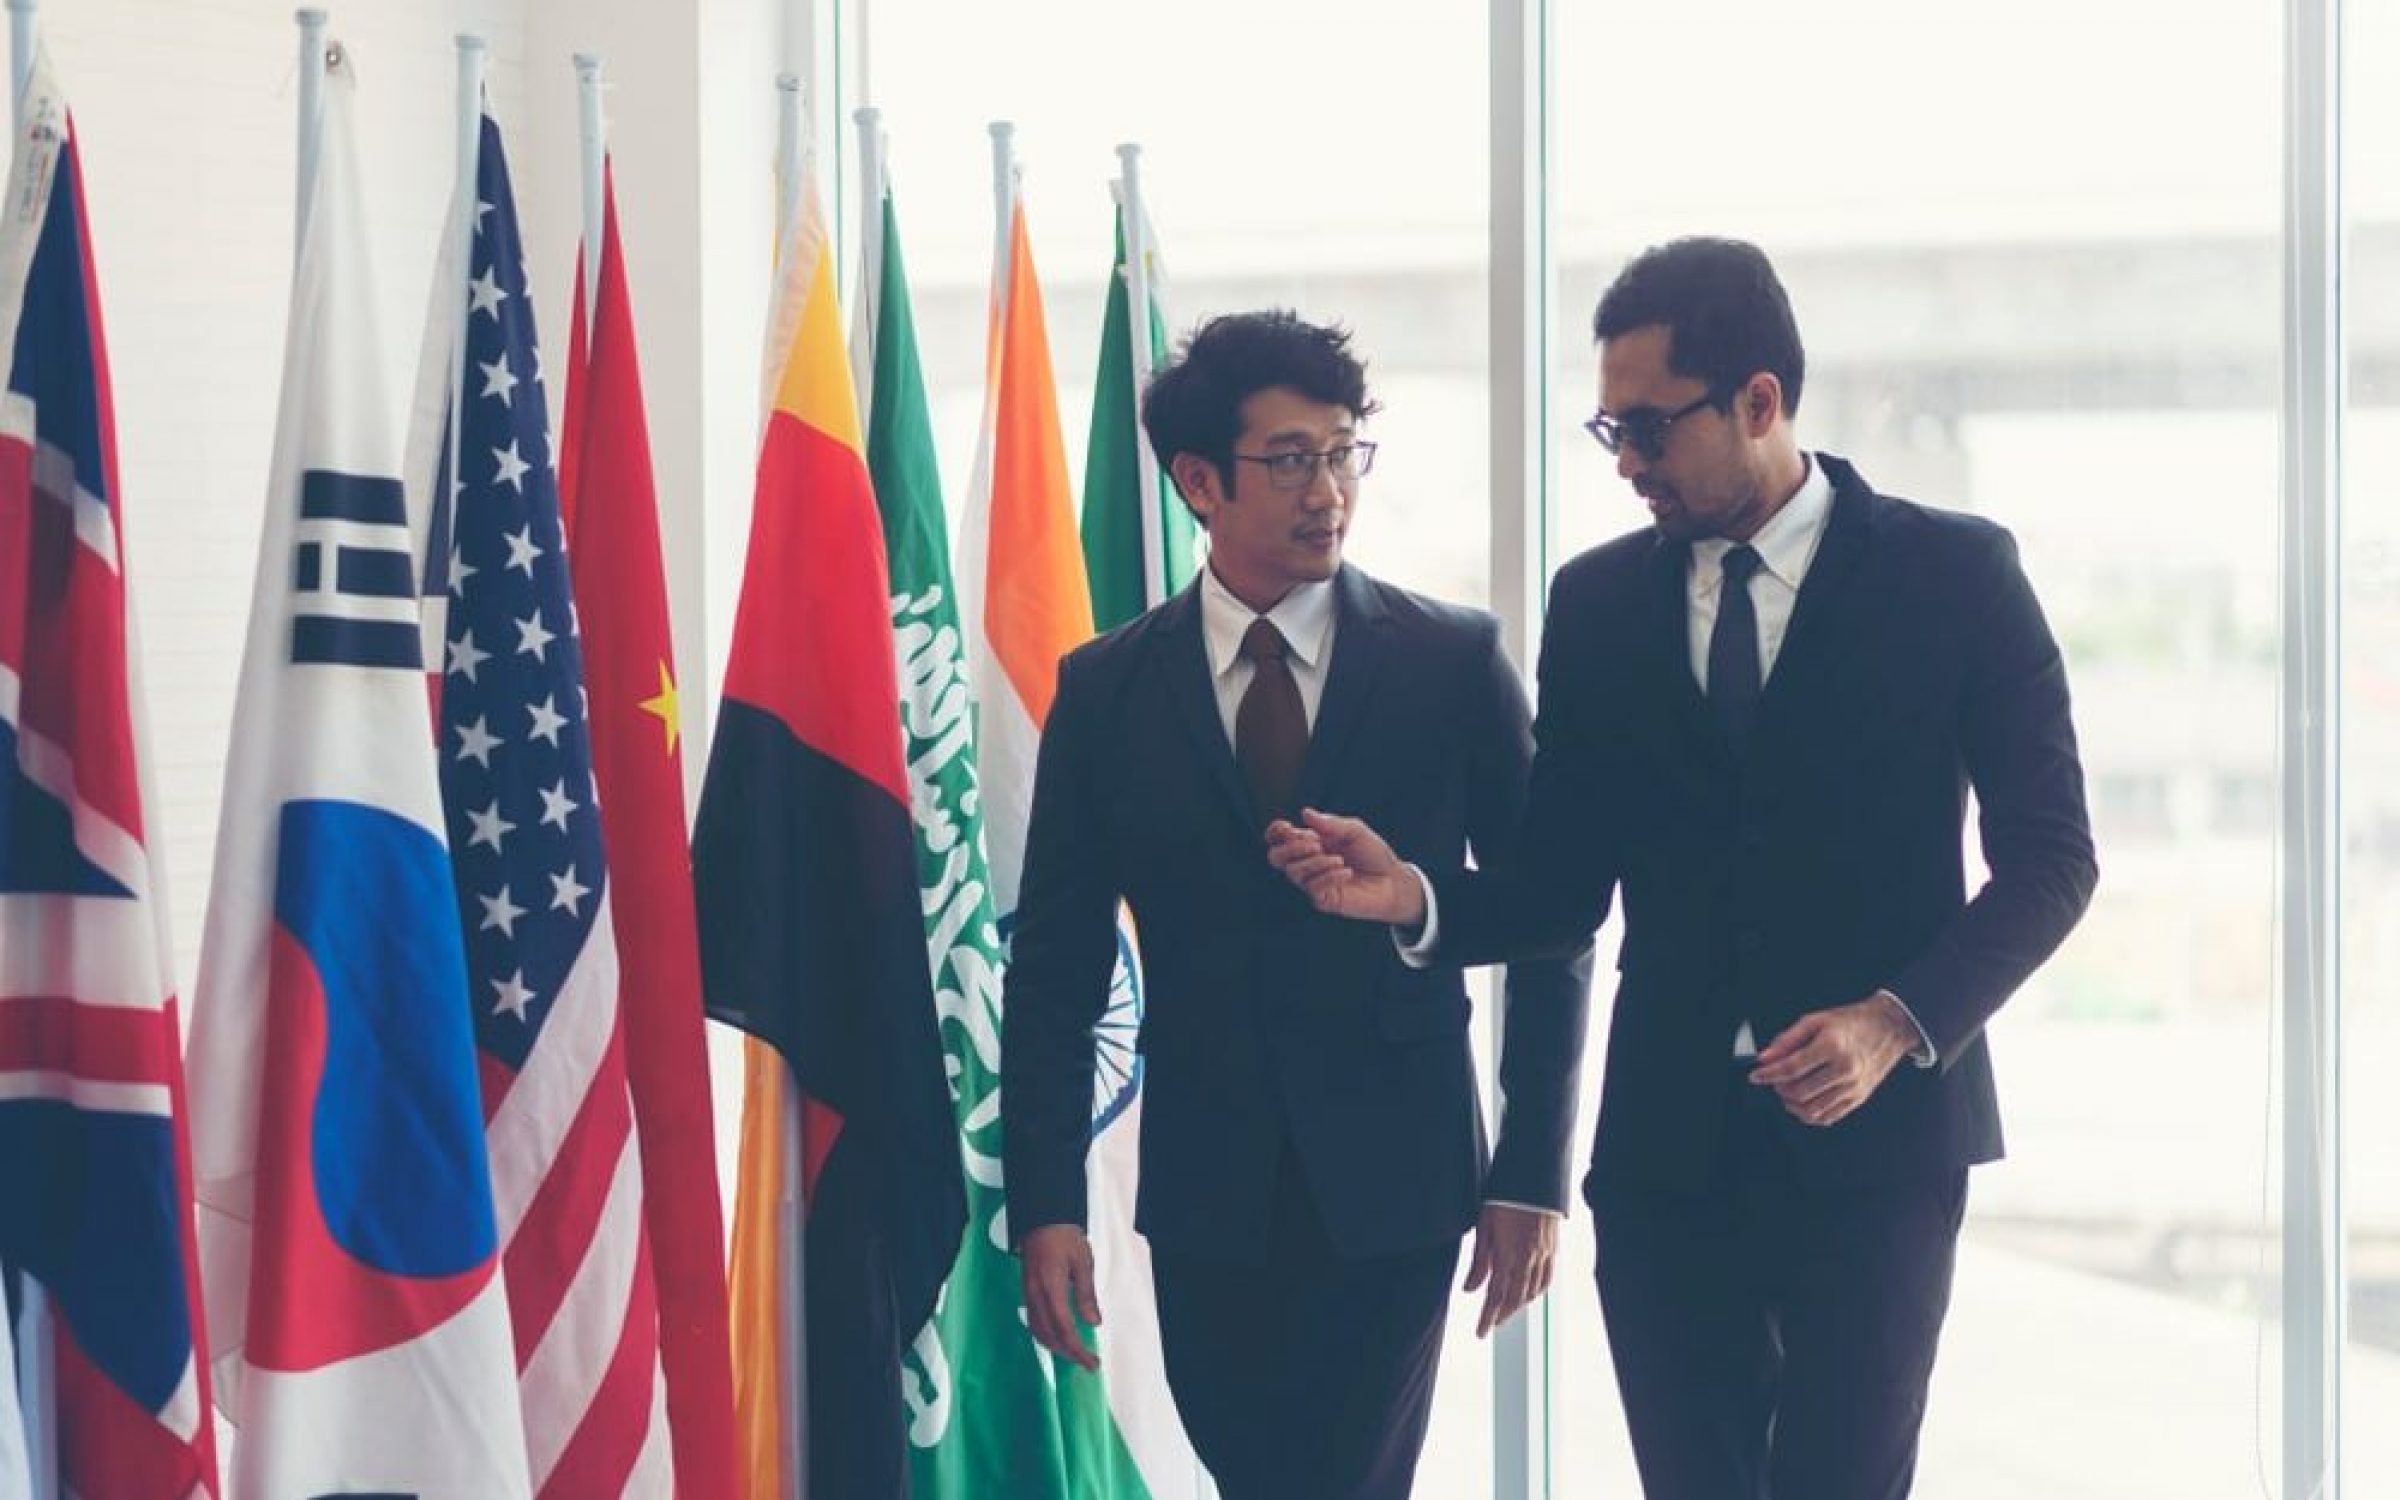 Diplomats: the unsung heroes of international affairs.